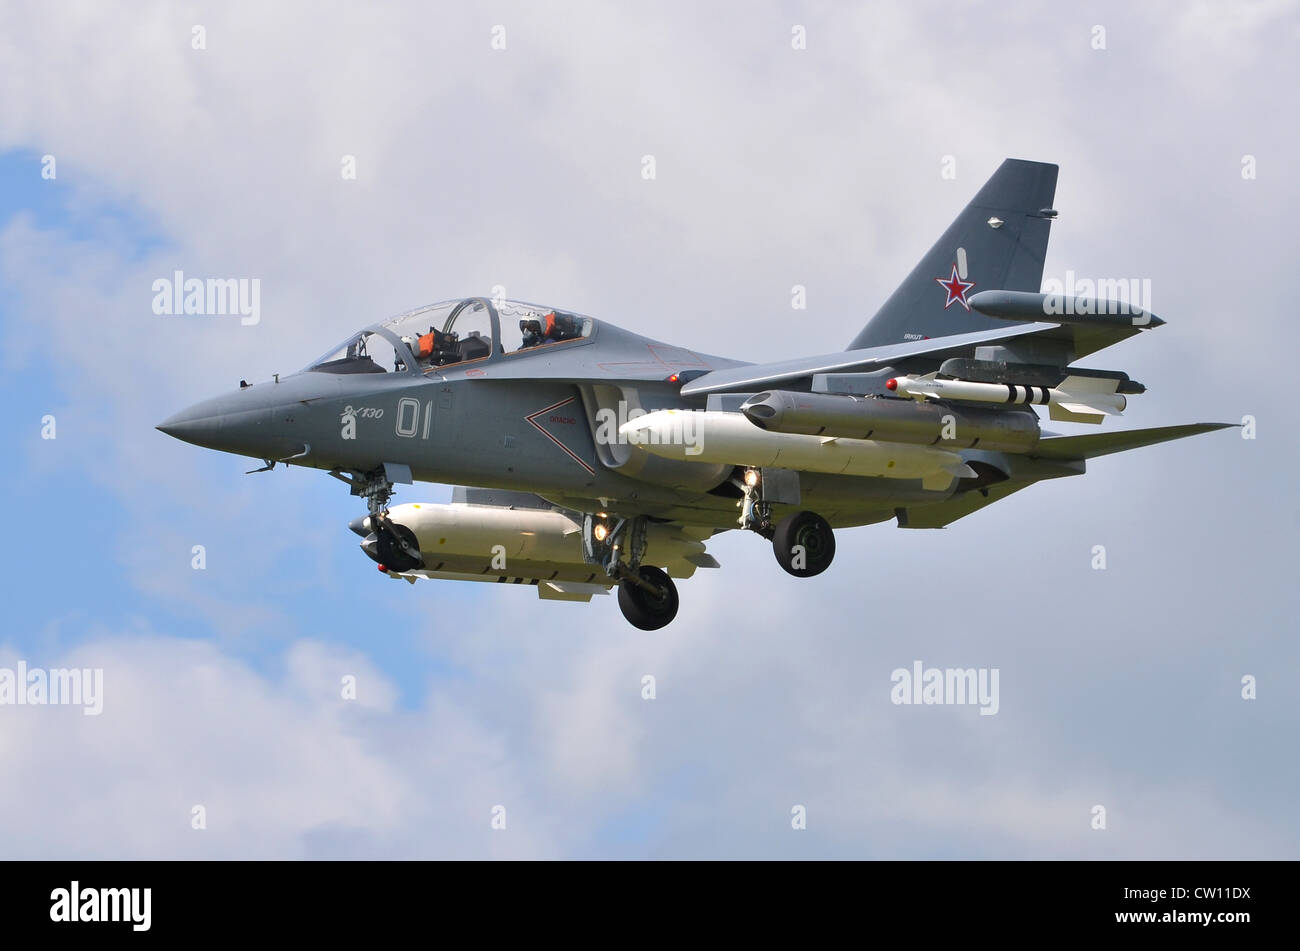 Yakovlev Yak-130 Mitten operated by the Russian Air Force on approach for landing at RAF Fairford, UK Stock Photo